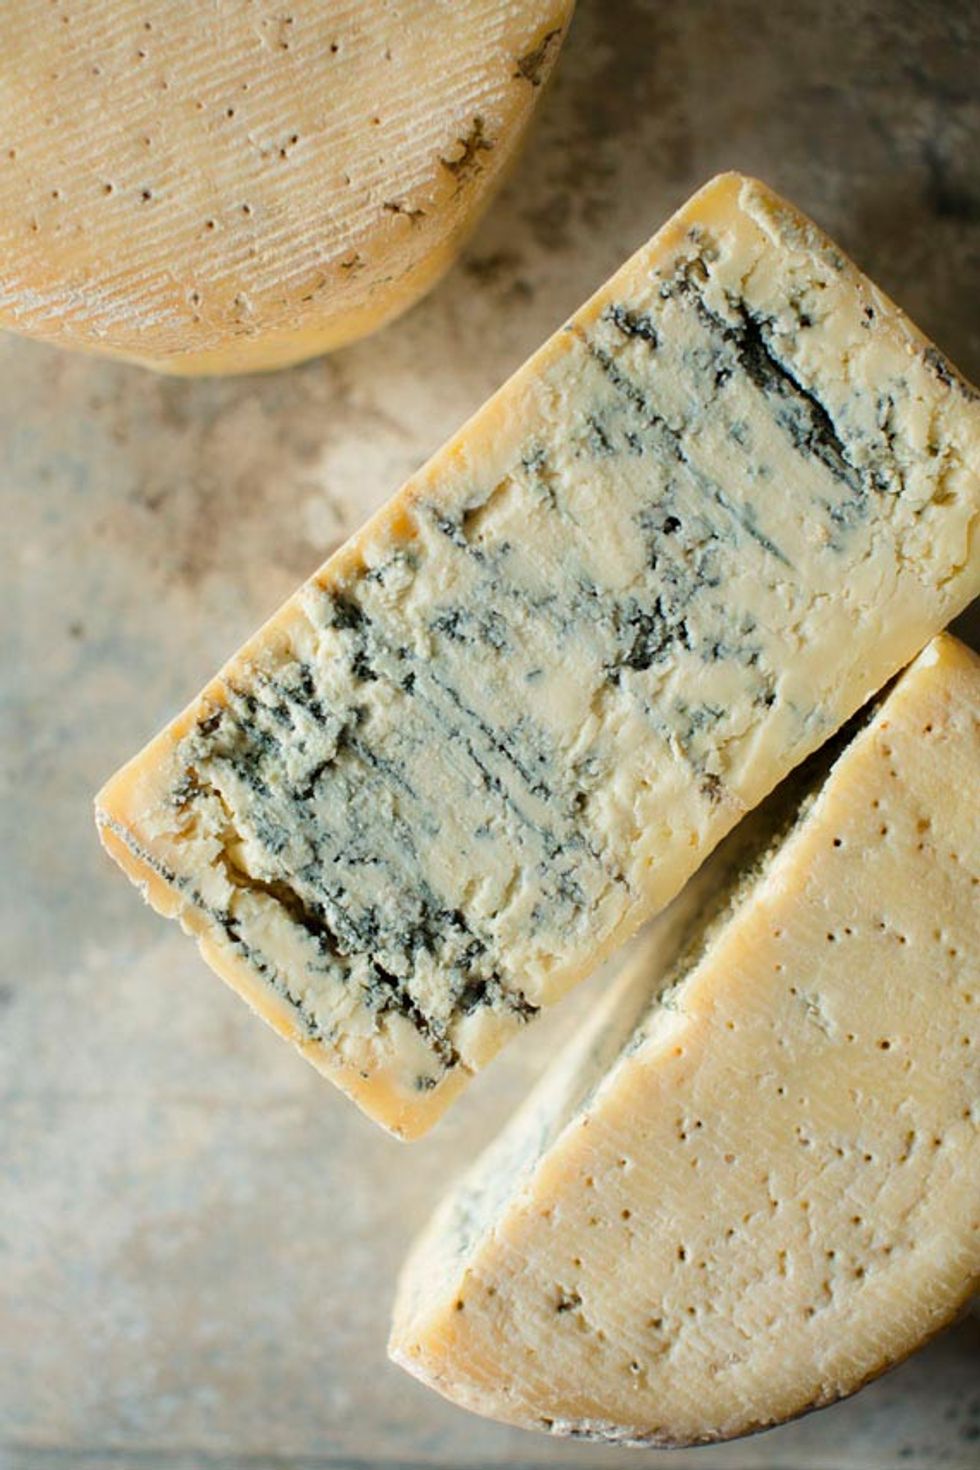 A Cheese That's Equal Parts Land, Beast, and Man